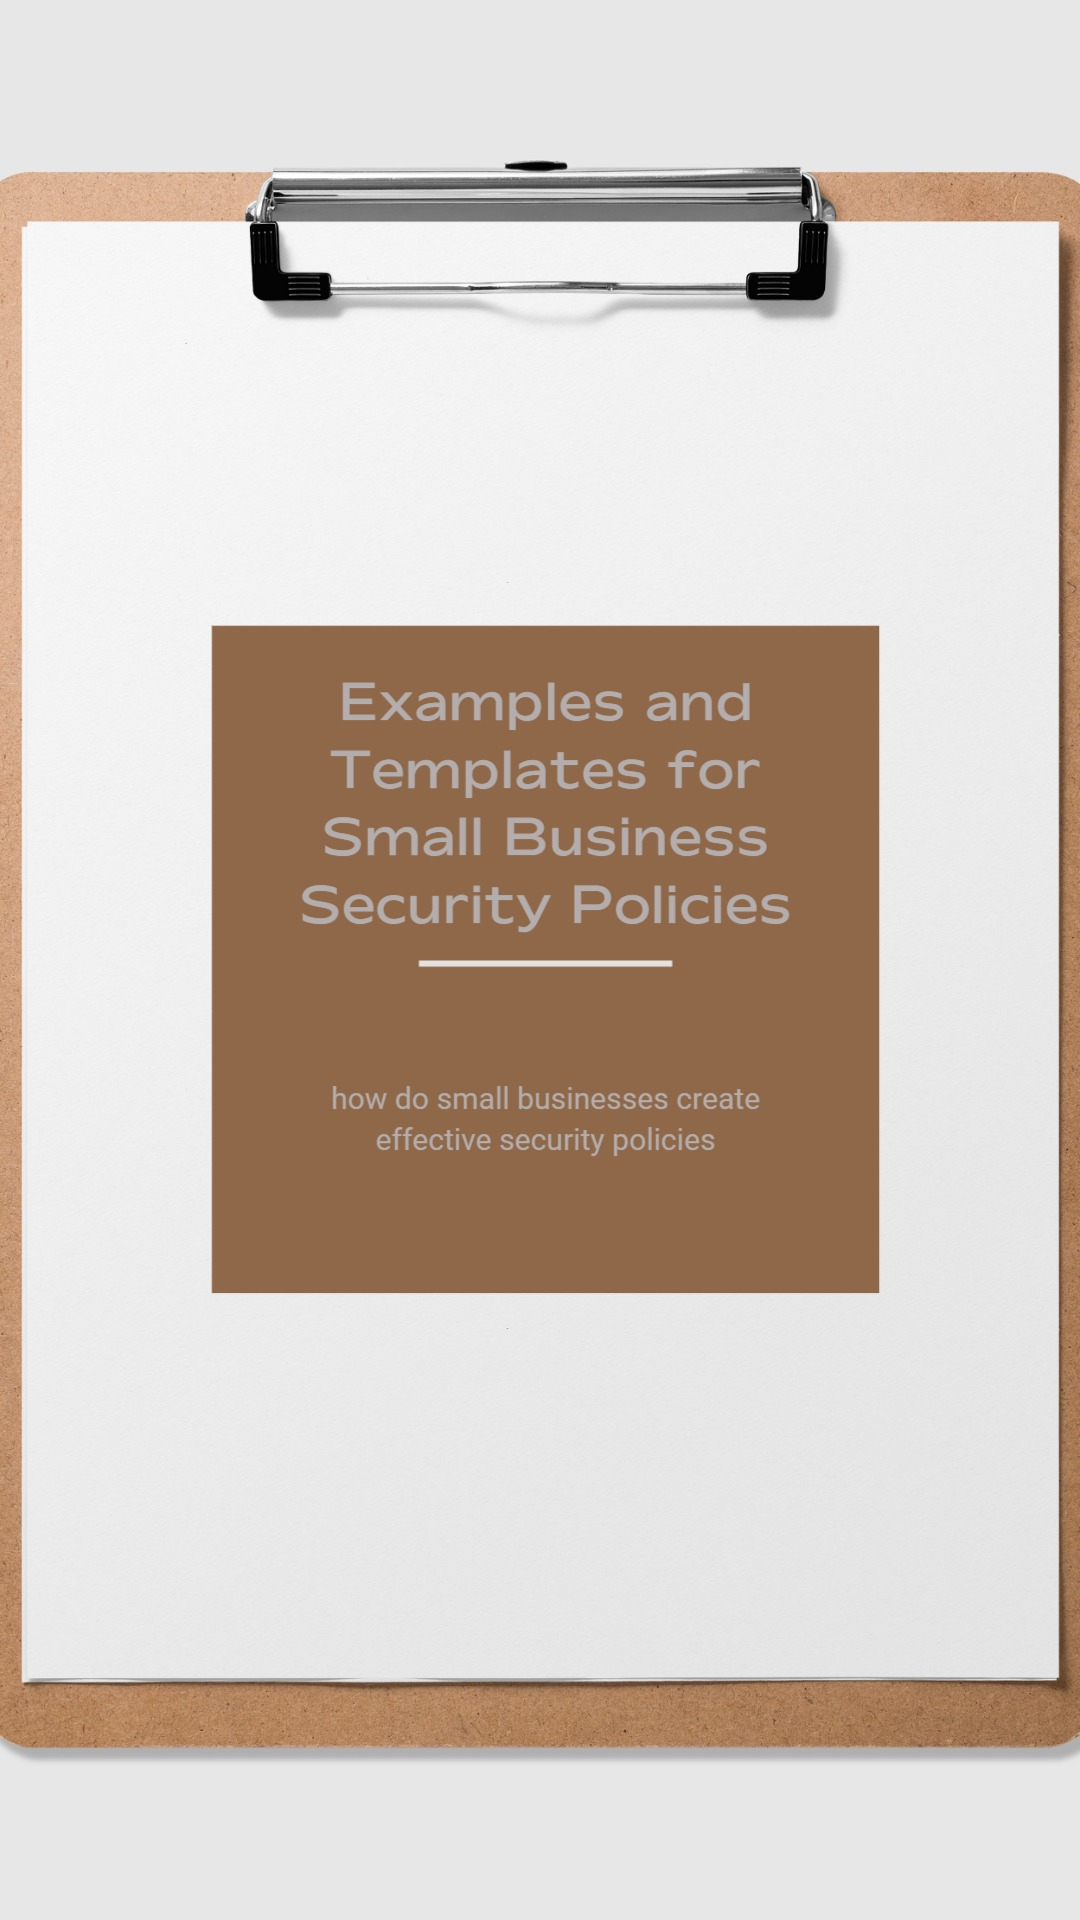 A visual representation of a document titled 'Examples and Templates for Small Business Security Policies' with a highlighted section on 'how do small businesses create effective security policies'.